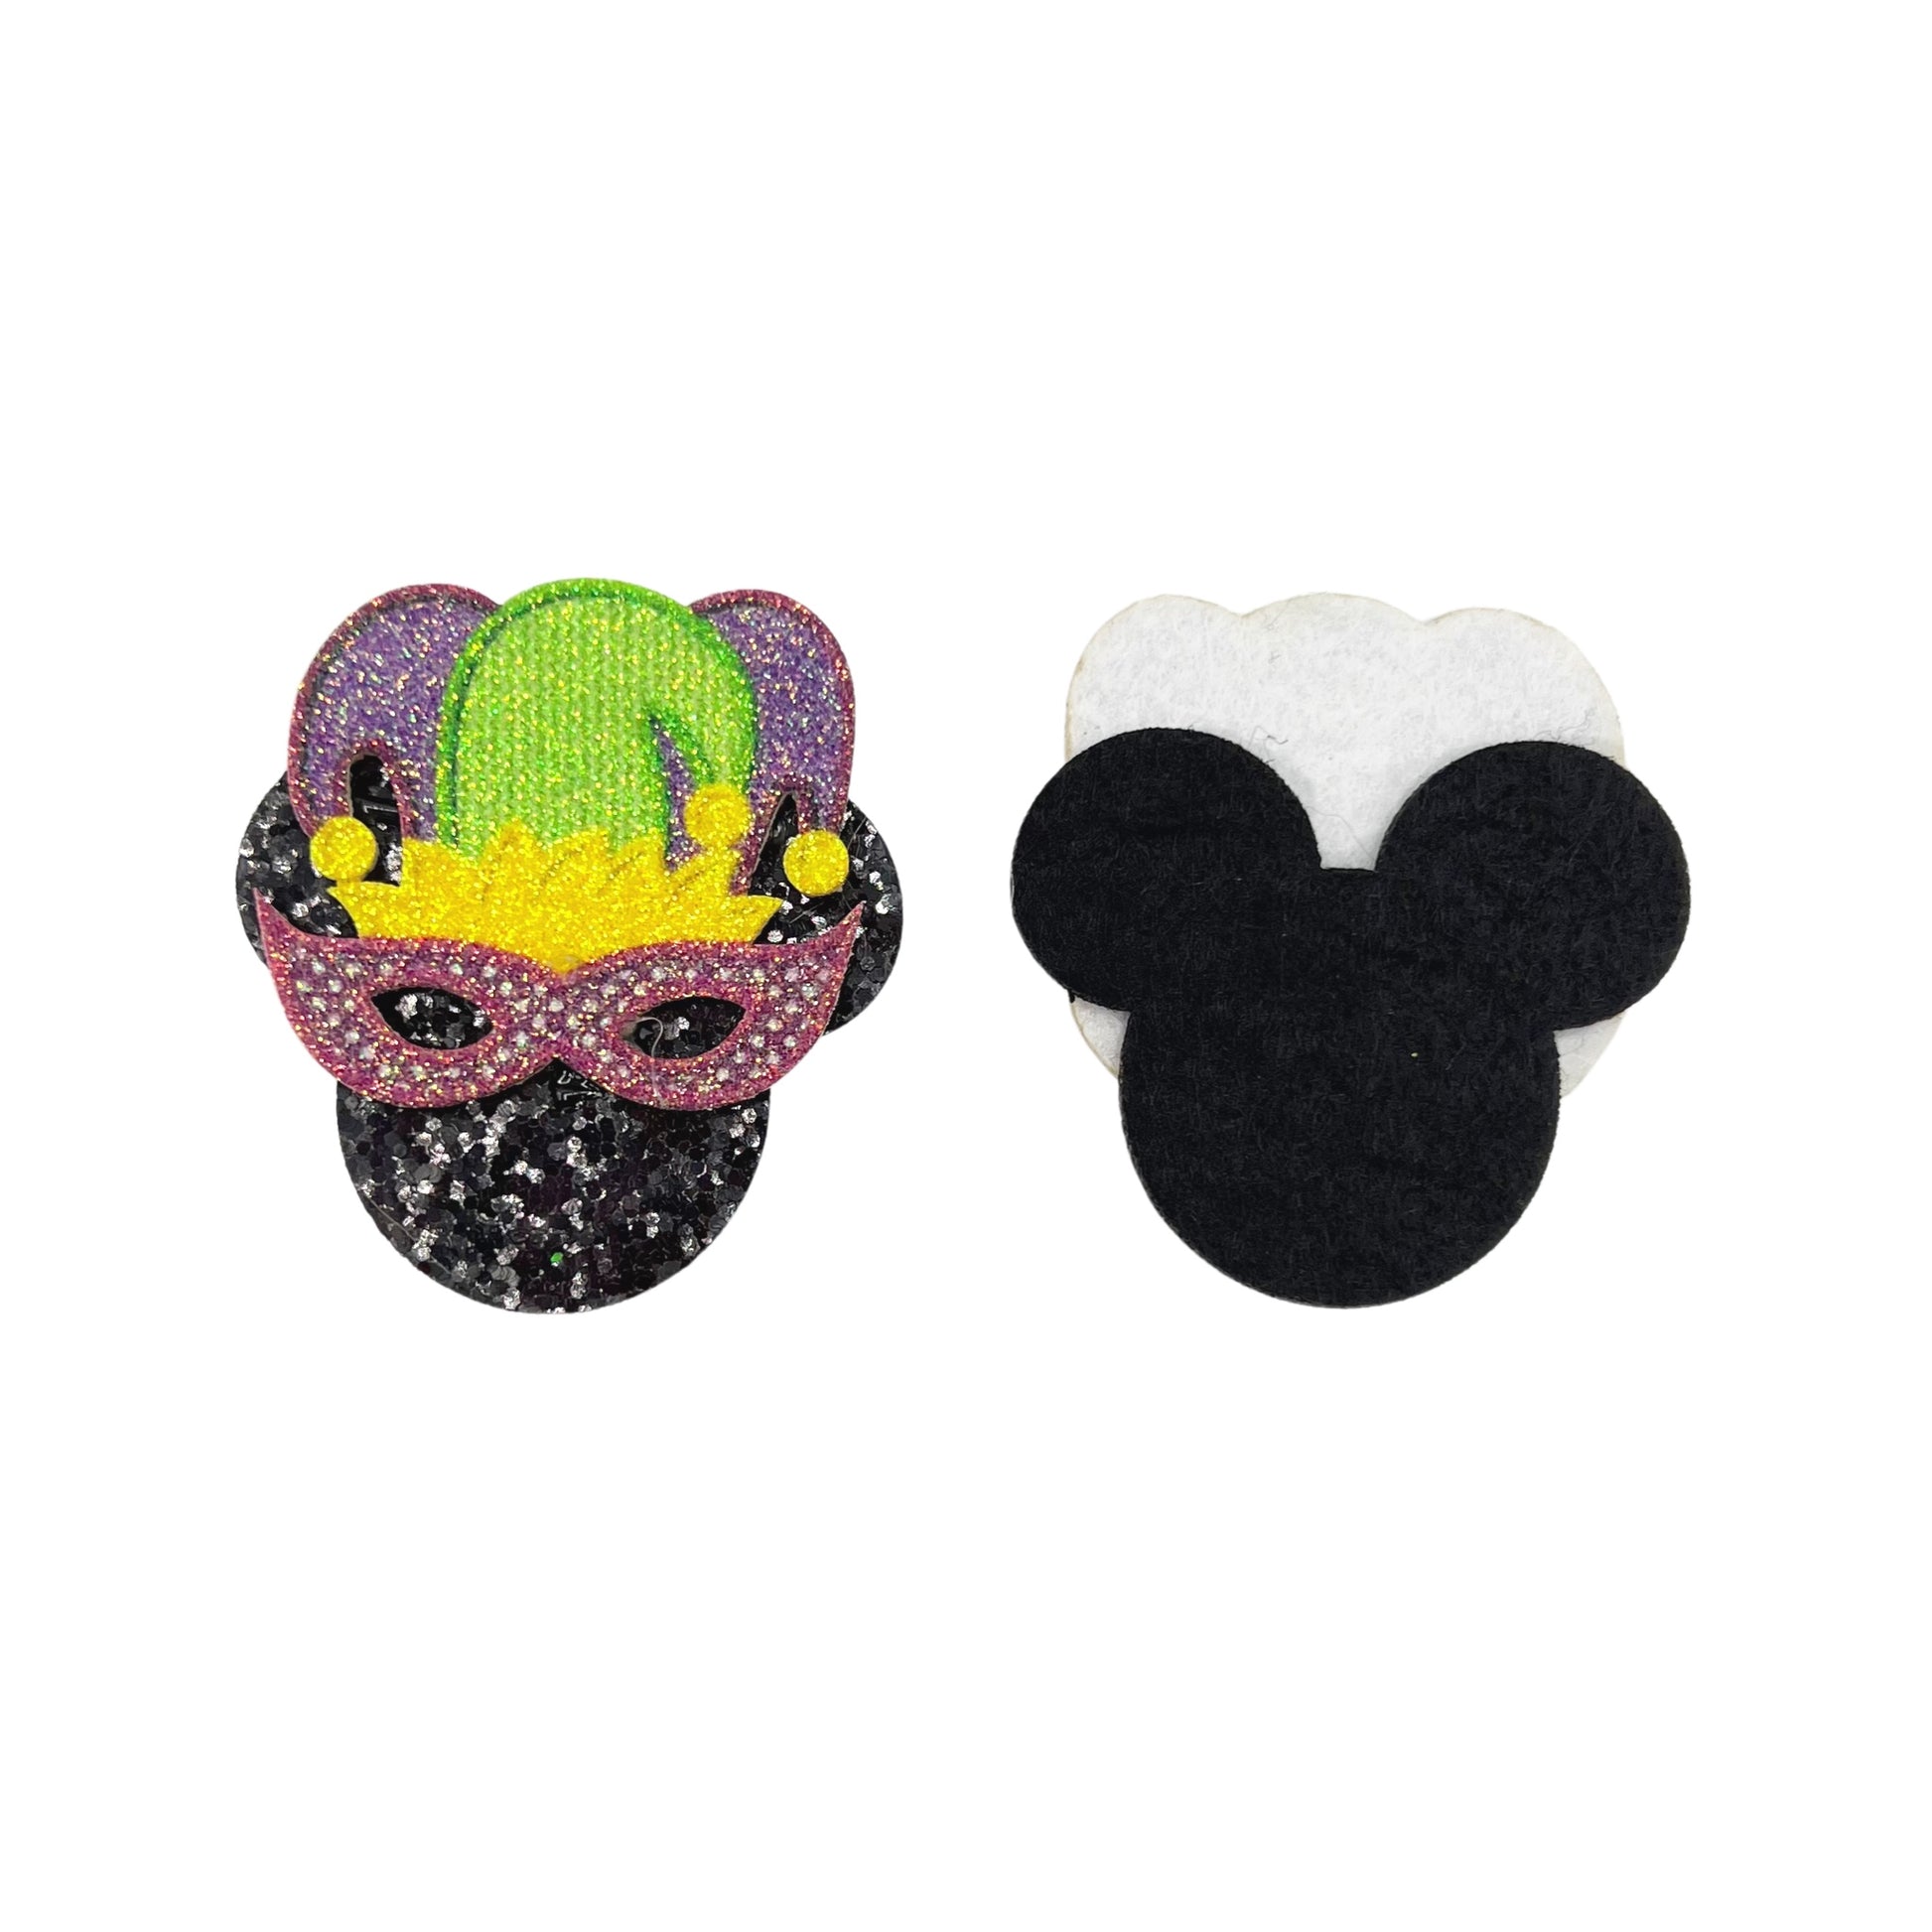 Purple mask with purple, green, and yellow hat on black glitter mouse head